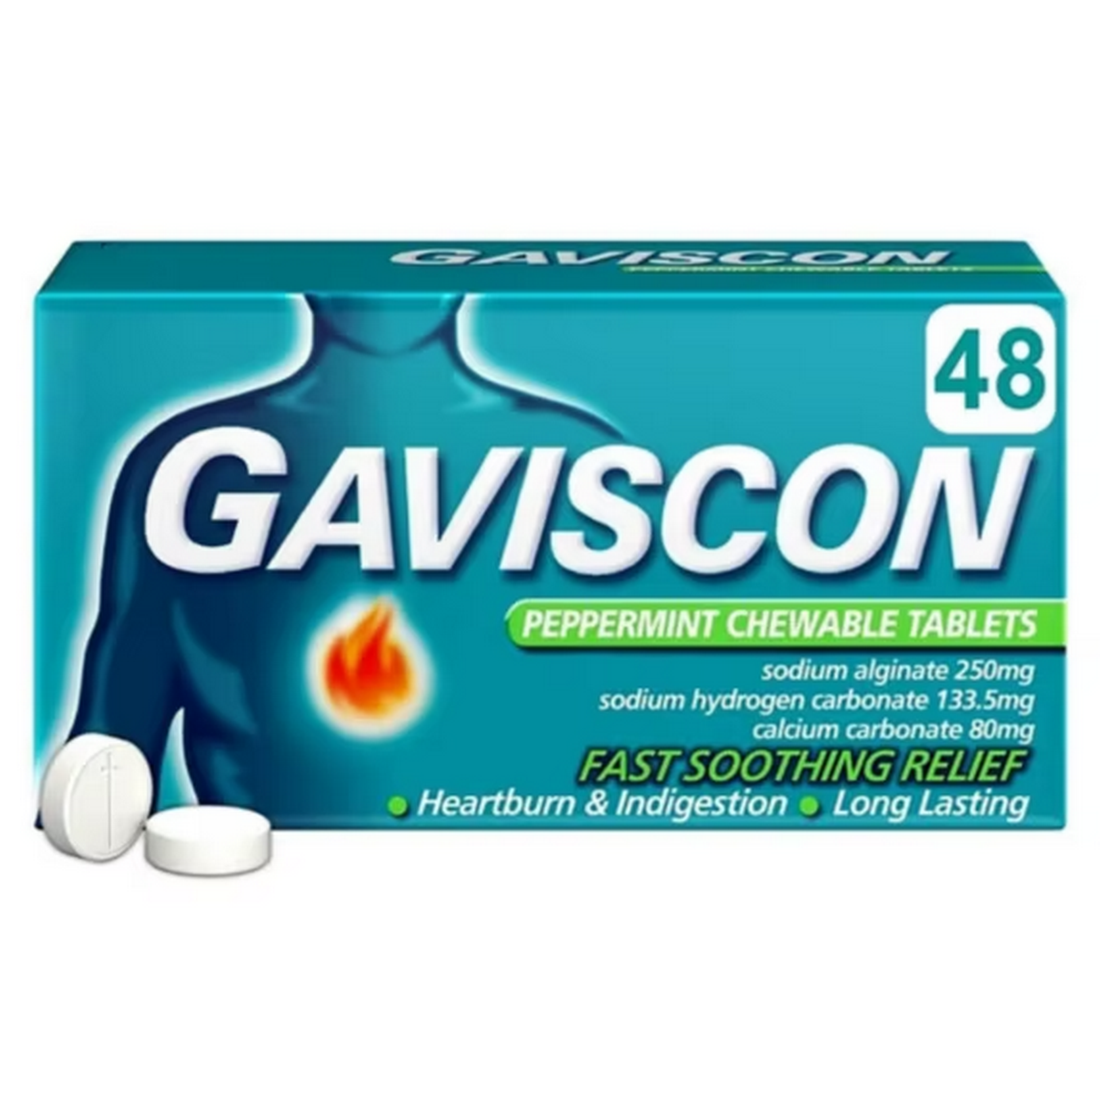 Gaviscon Heartburn &amp; Indigestion Relief Tablets, Peppermint Flavour